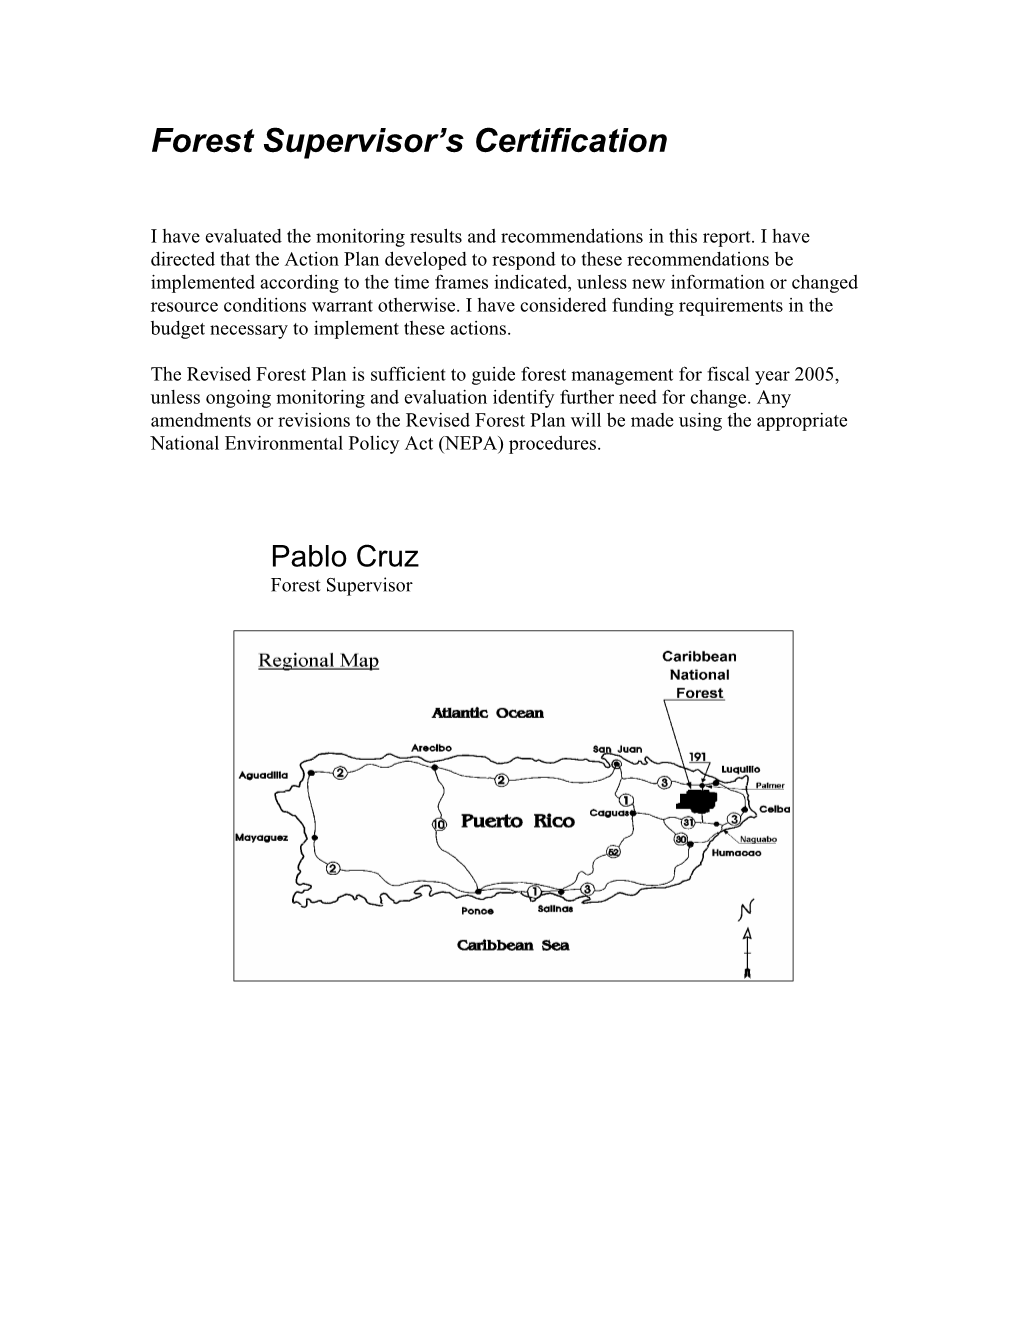 2003 Monitoring and Evaluation Report Caribbean National Forest